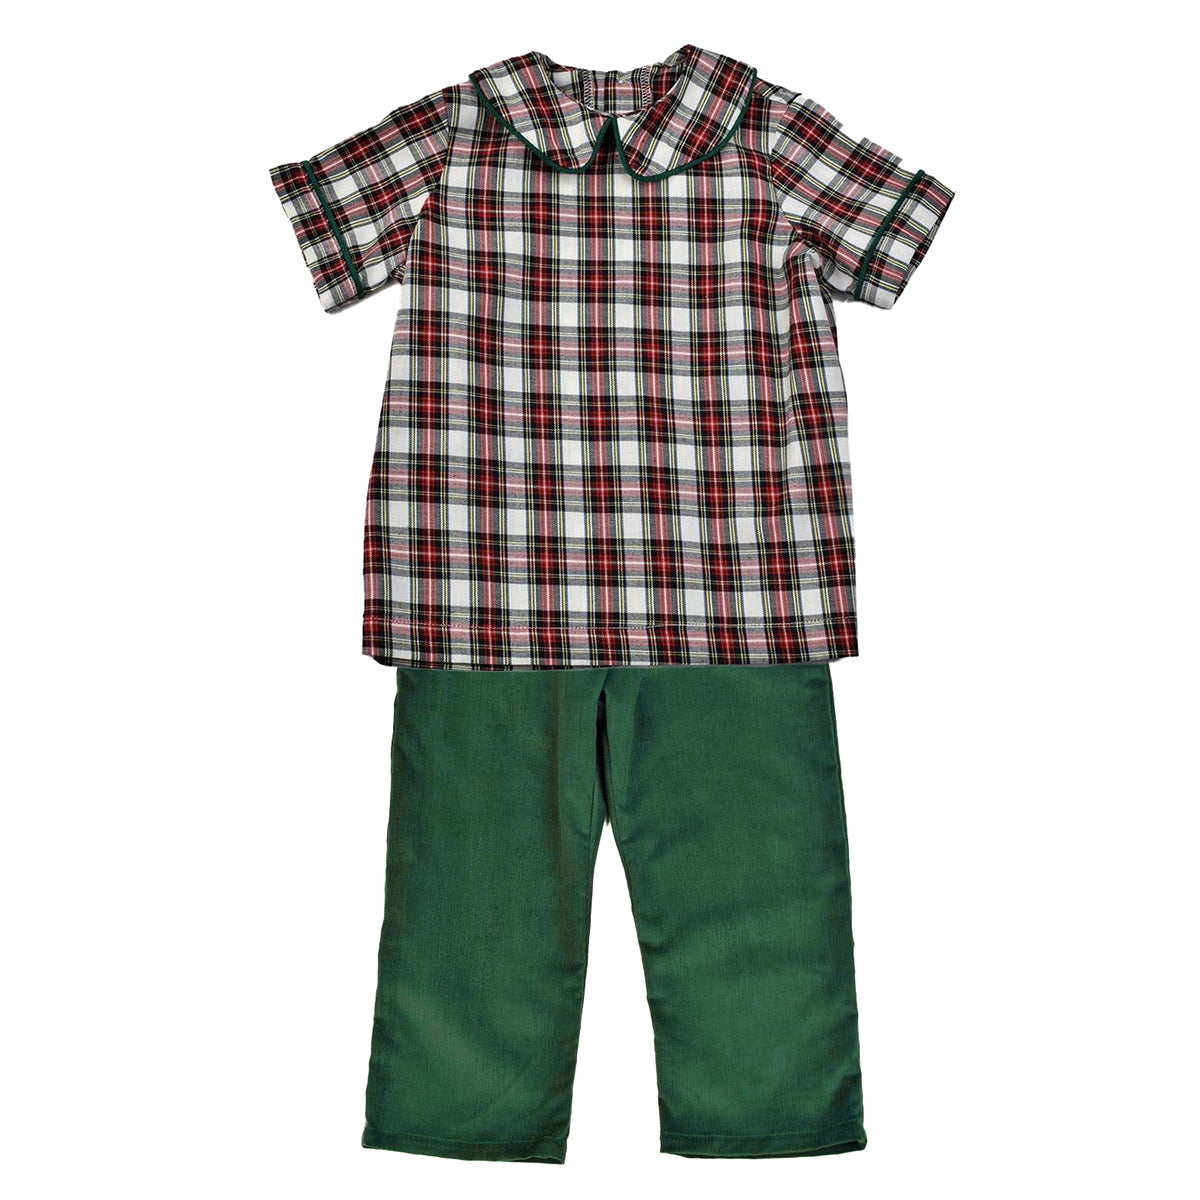 Holiday Plaid Little Boy's Christmas Pants Set by Funtasia Too